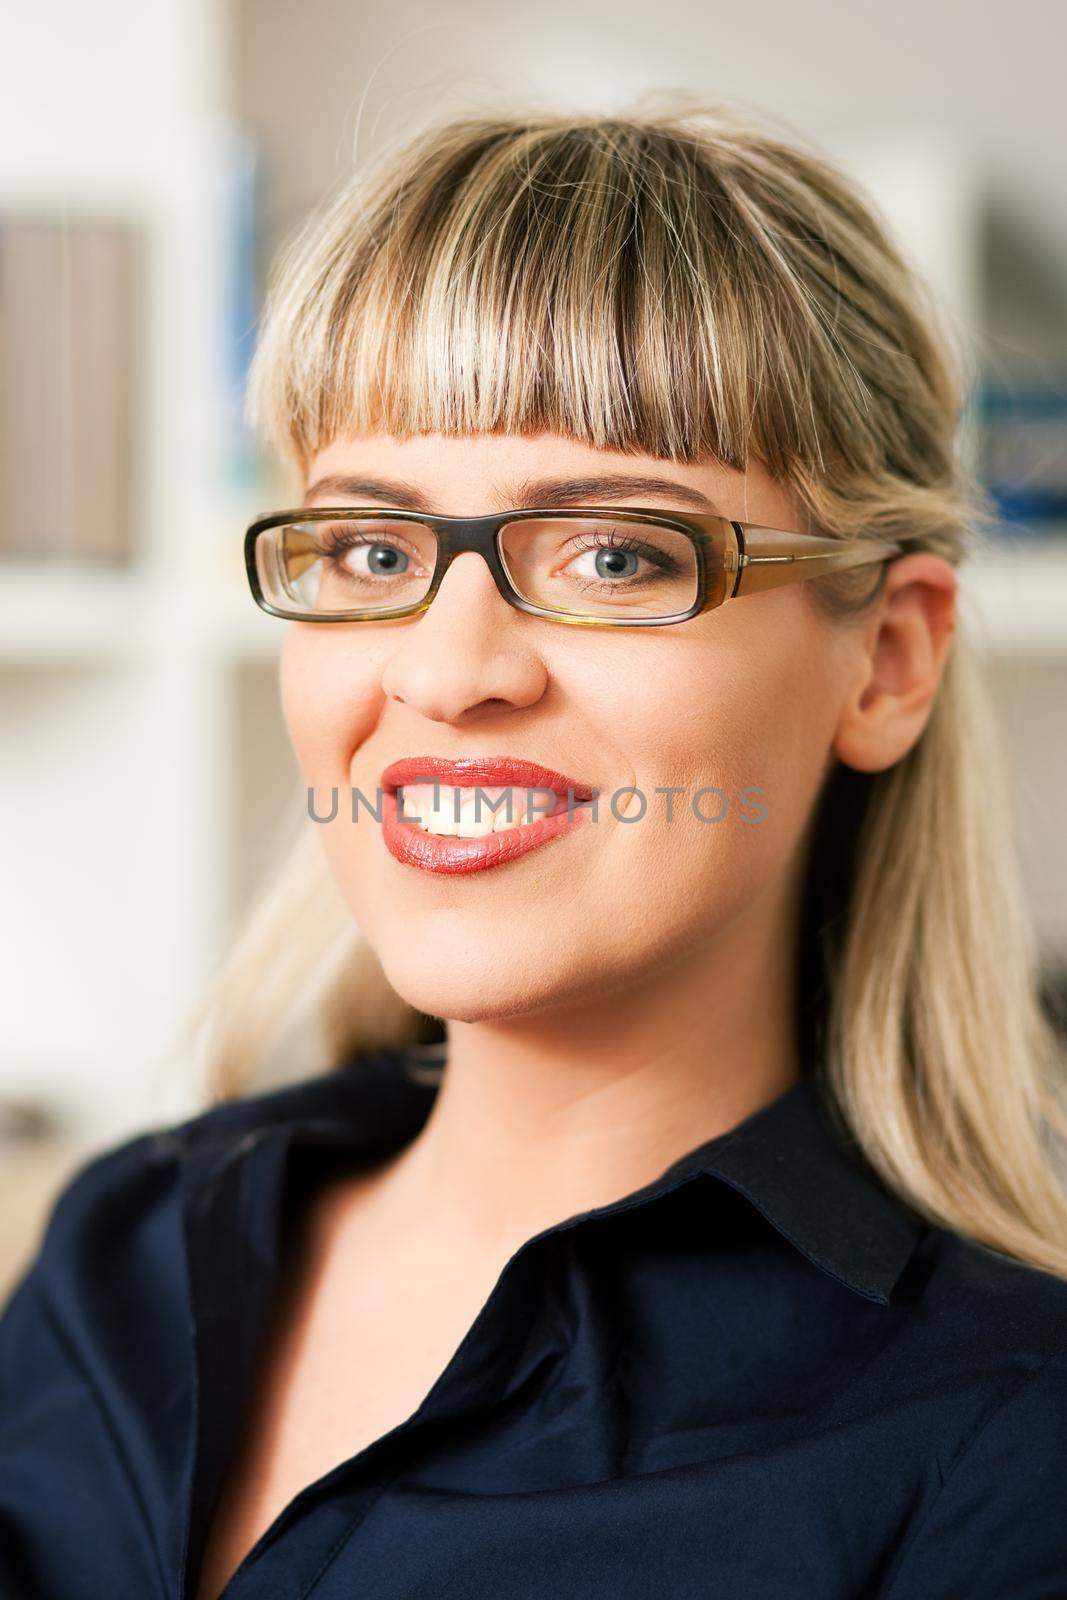 Portrait of a young woman with glasses sitting in front of a book shelf